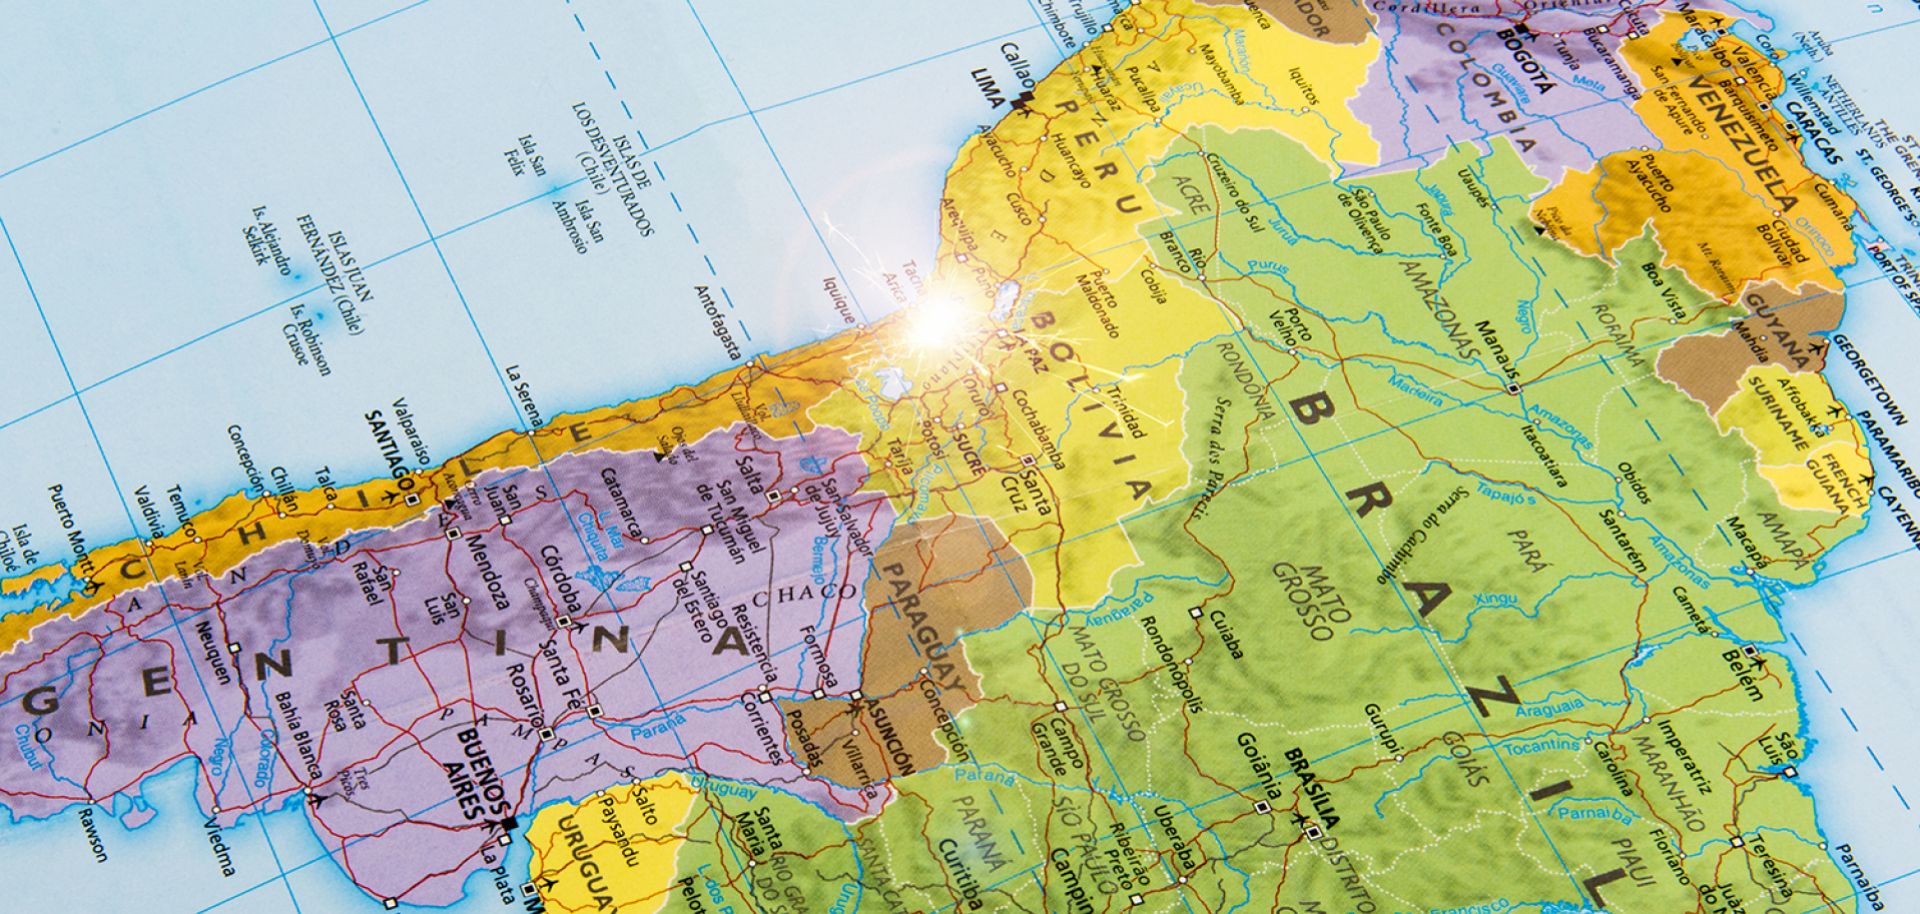 A map of South America shows the long-disputed borders between Chile and Peru.